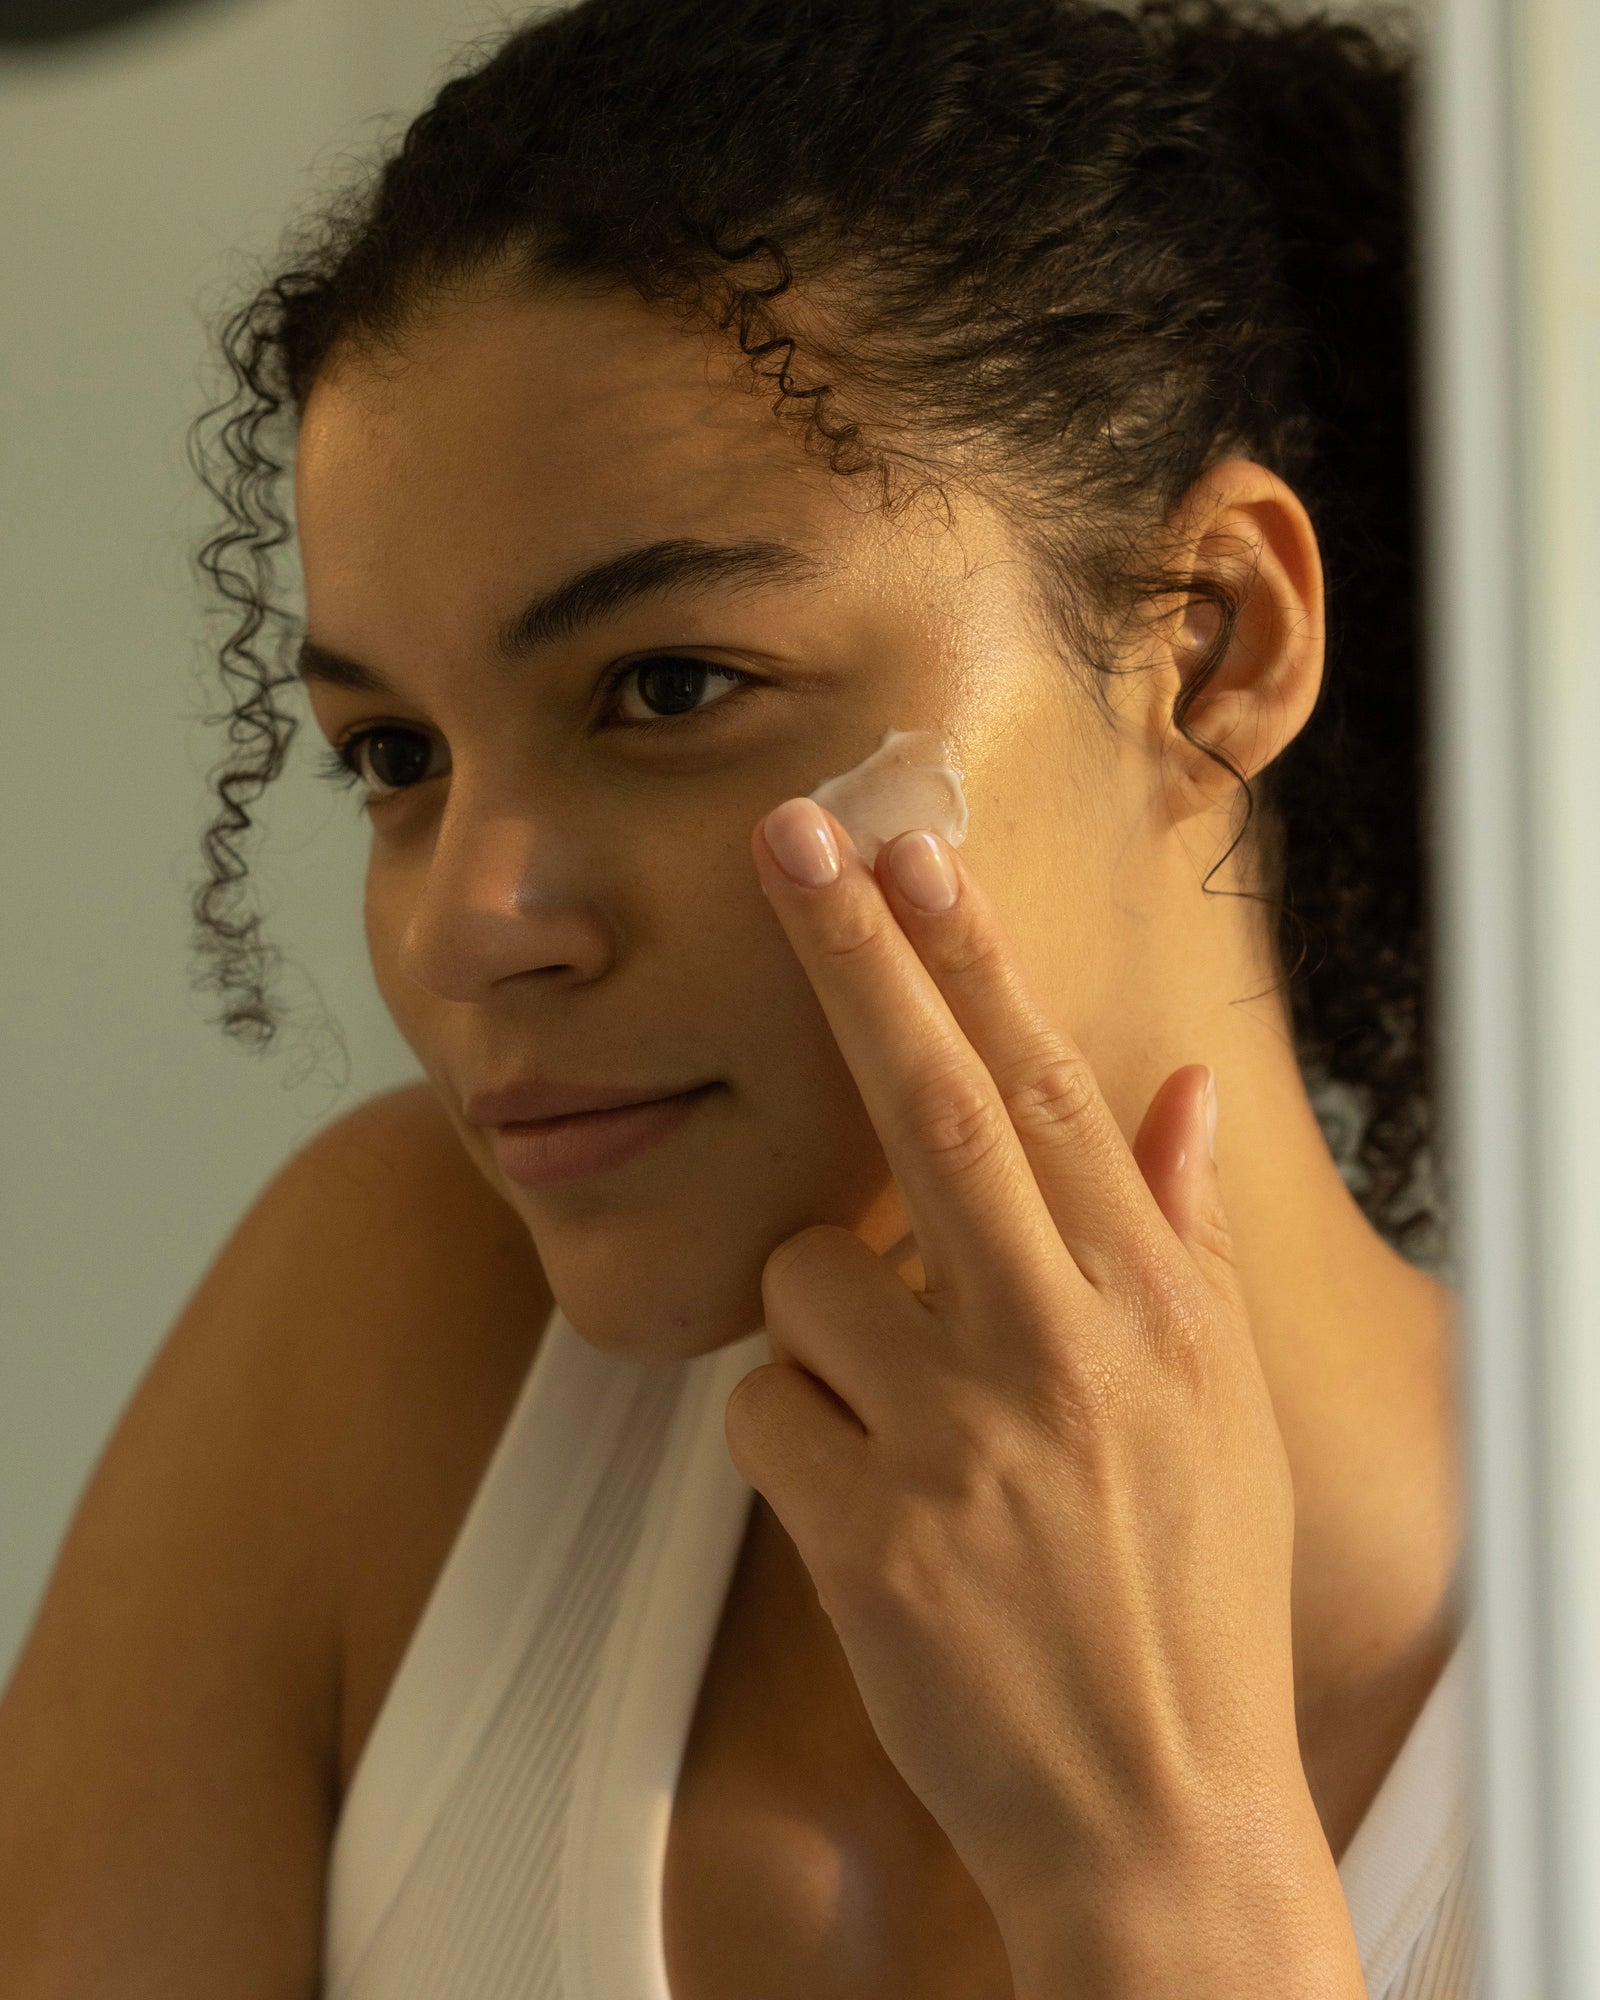 A curly-haired individual applies a dollop of The Hydration Duo by Cozy Earth to their cheek using their fingers. They are looking into a mirror, dressed in a sleeveless white top, and appear deeply focused on their skincare routine. The background is softly lit.